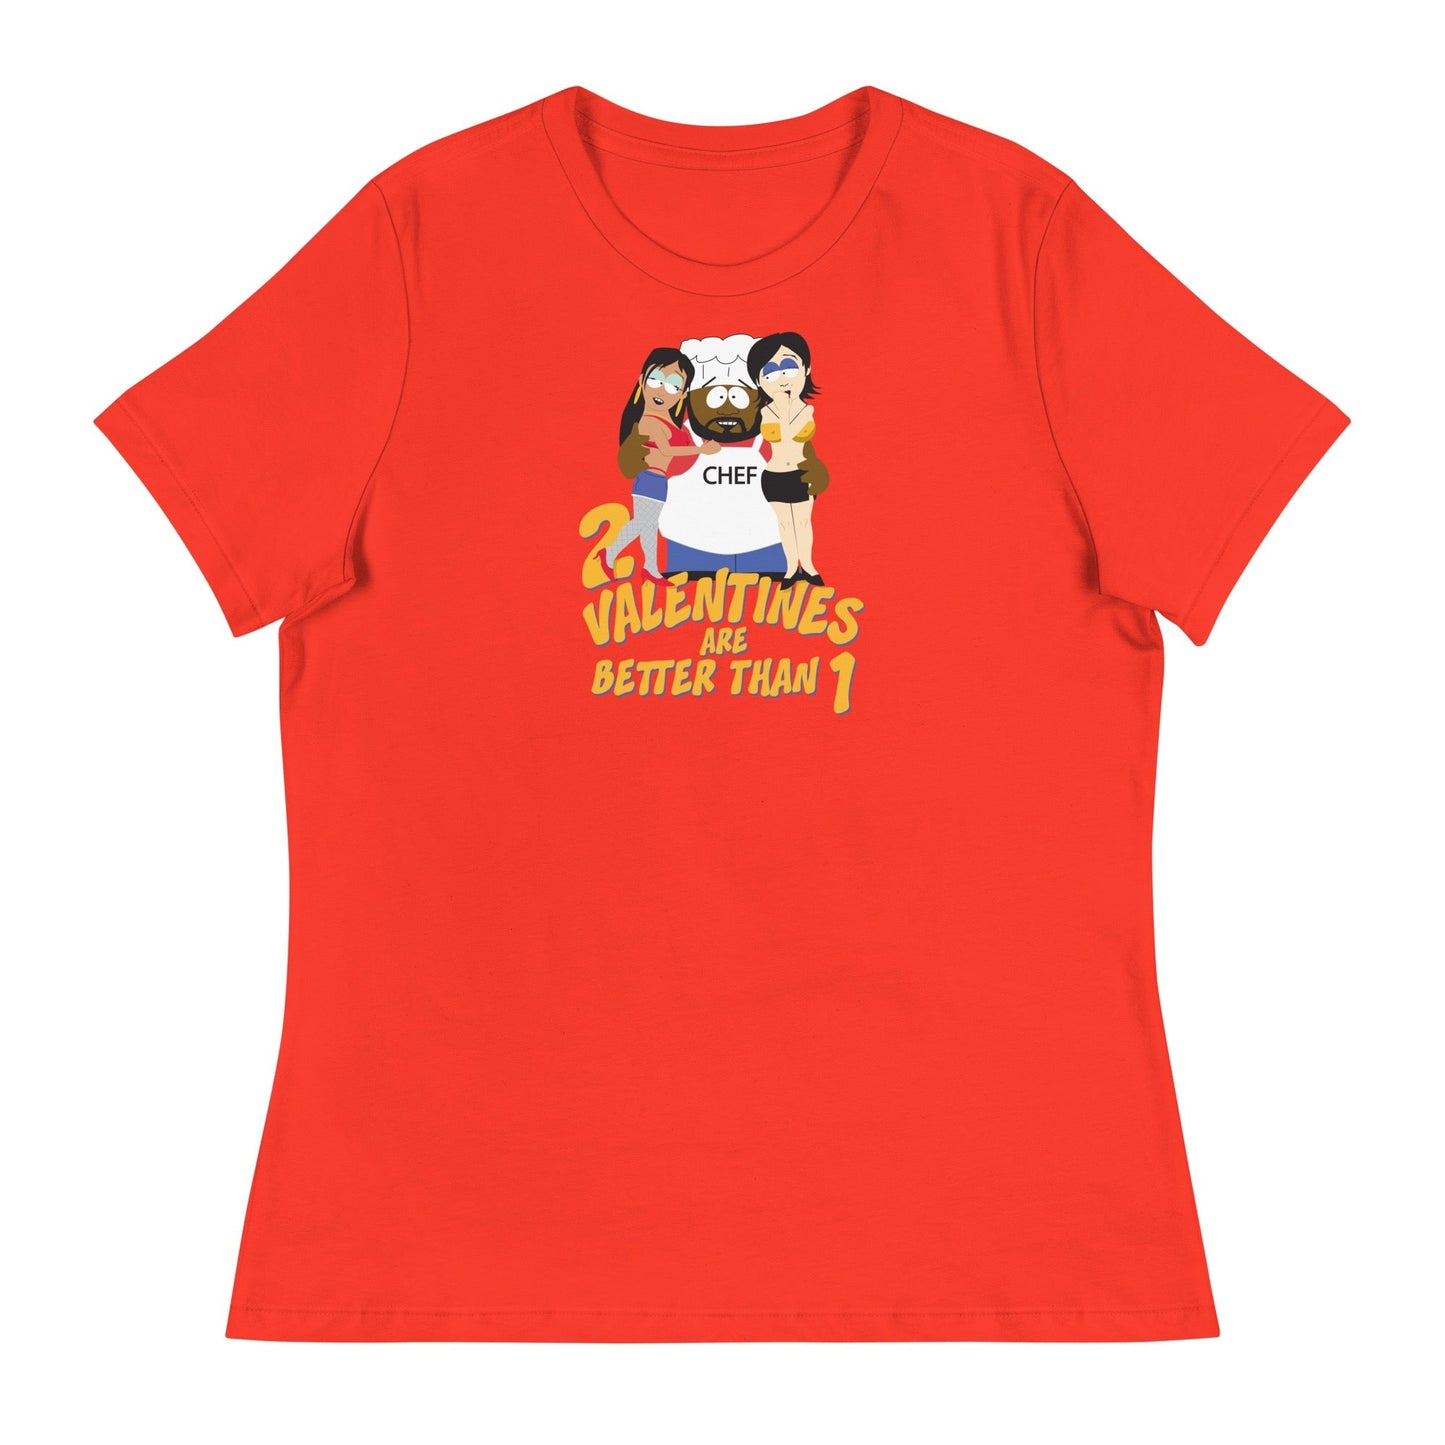 South Park Chef 2 Valentine's Are Better Than 1 Women's T - Shirt - Paramount Shop